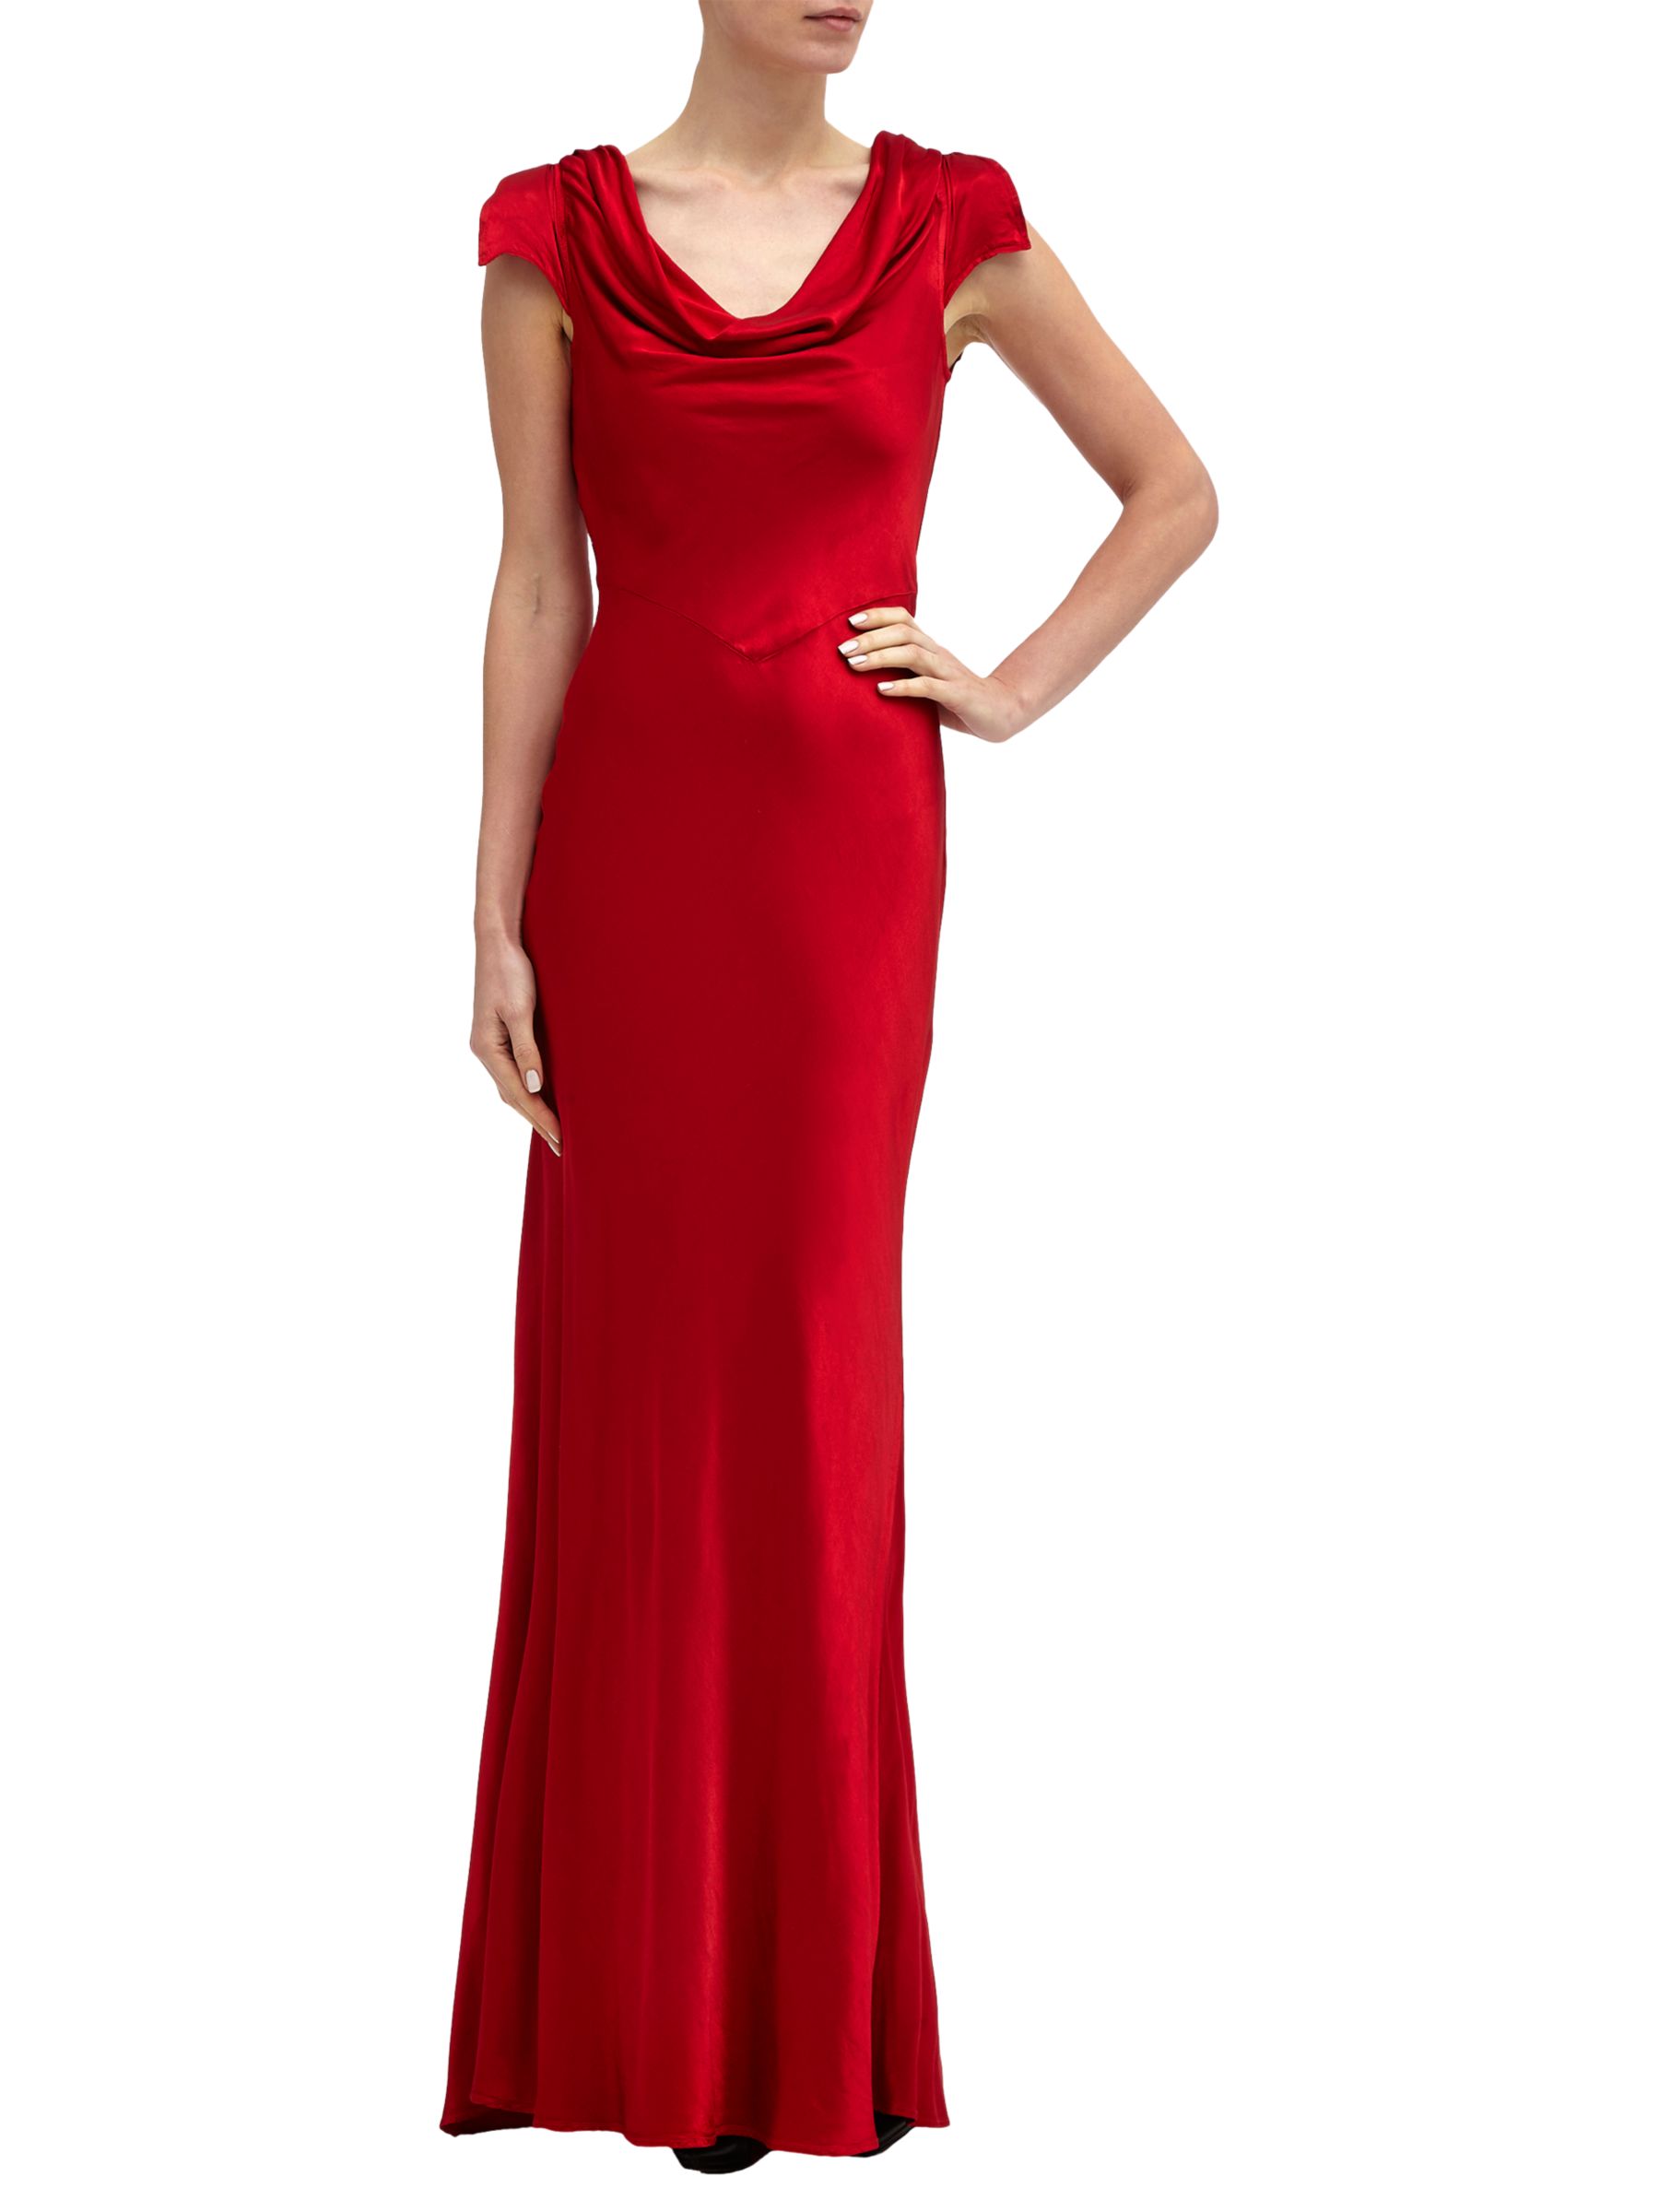 1930s Style Prom Dresses, Formal Dresses, Evening Gowns